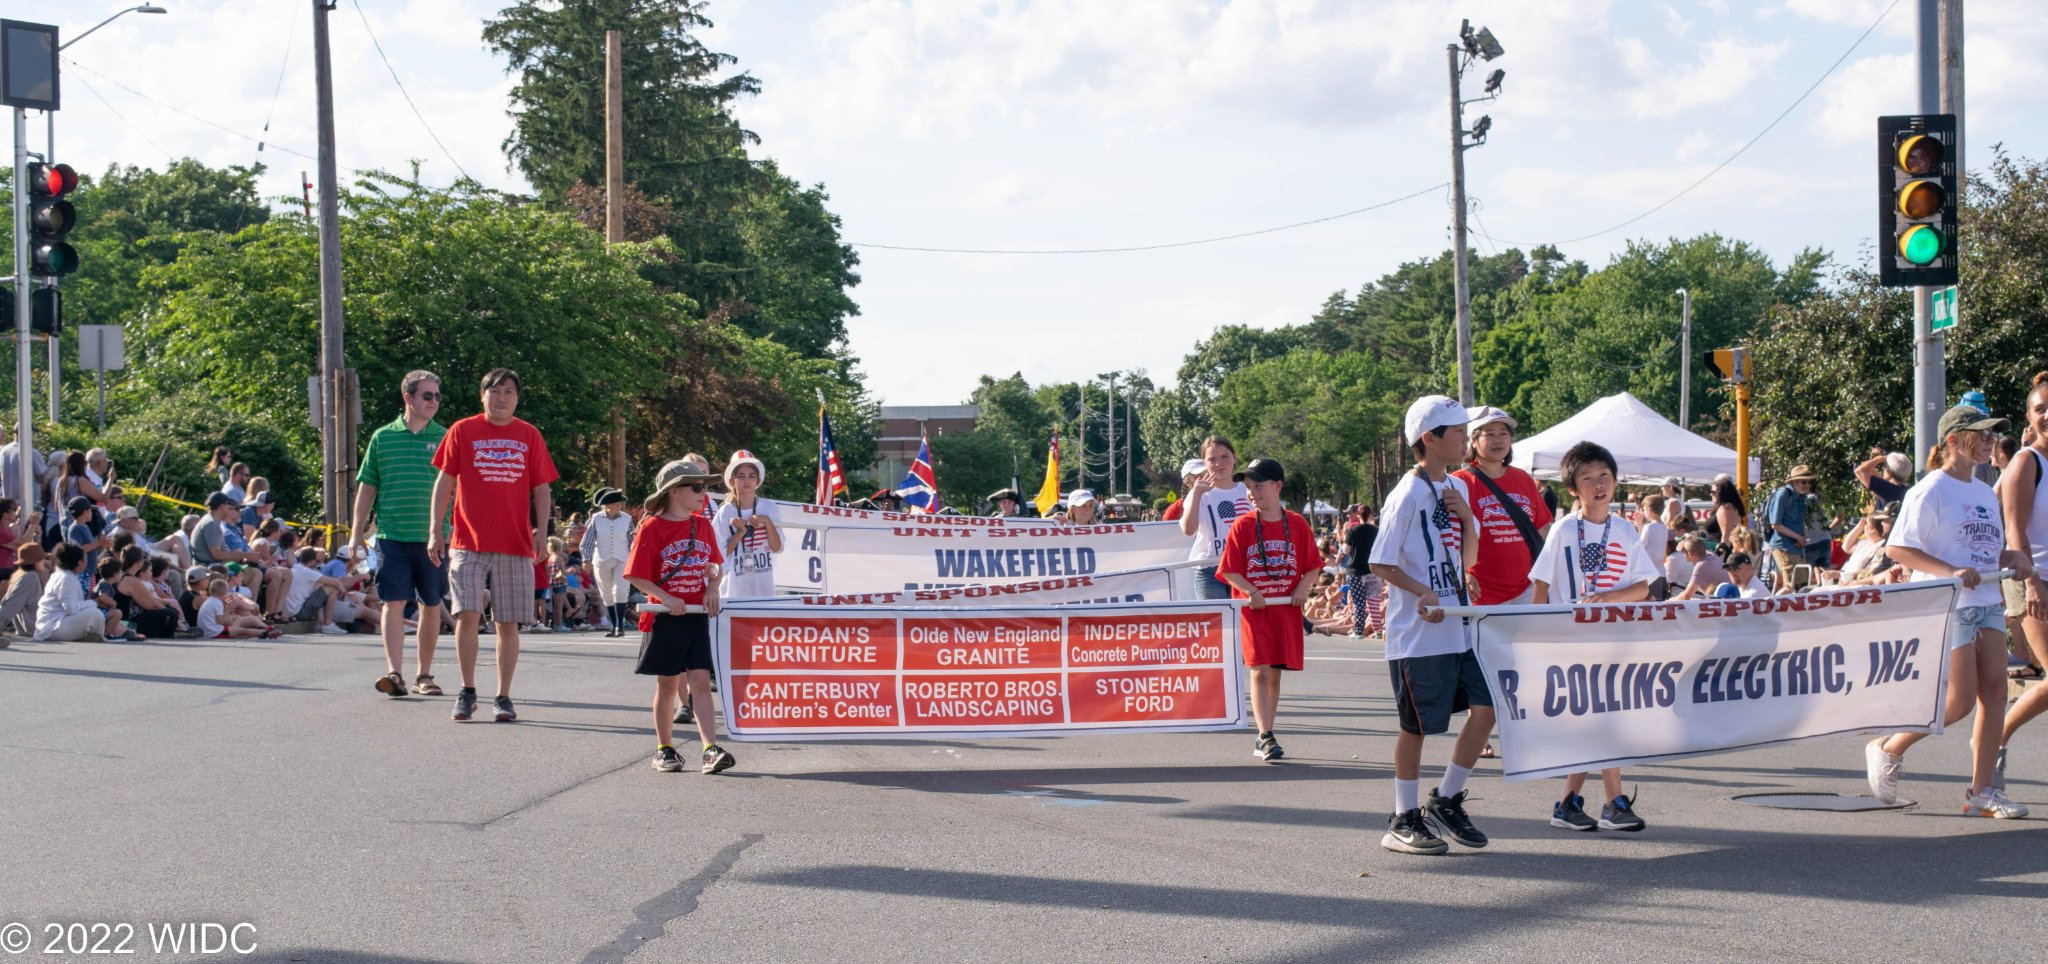 Wakefield 4th Of July Parade Seeks Youth Sign Holders The Reading Post